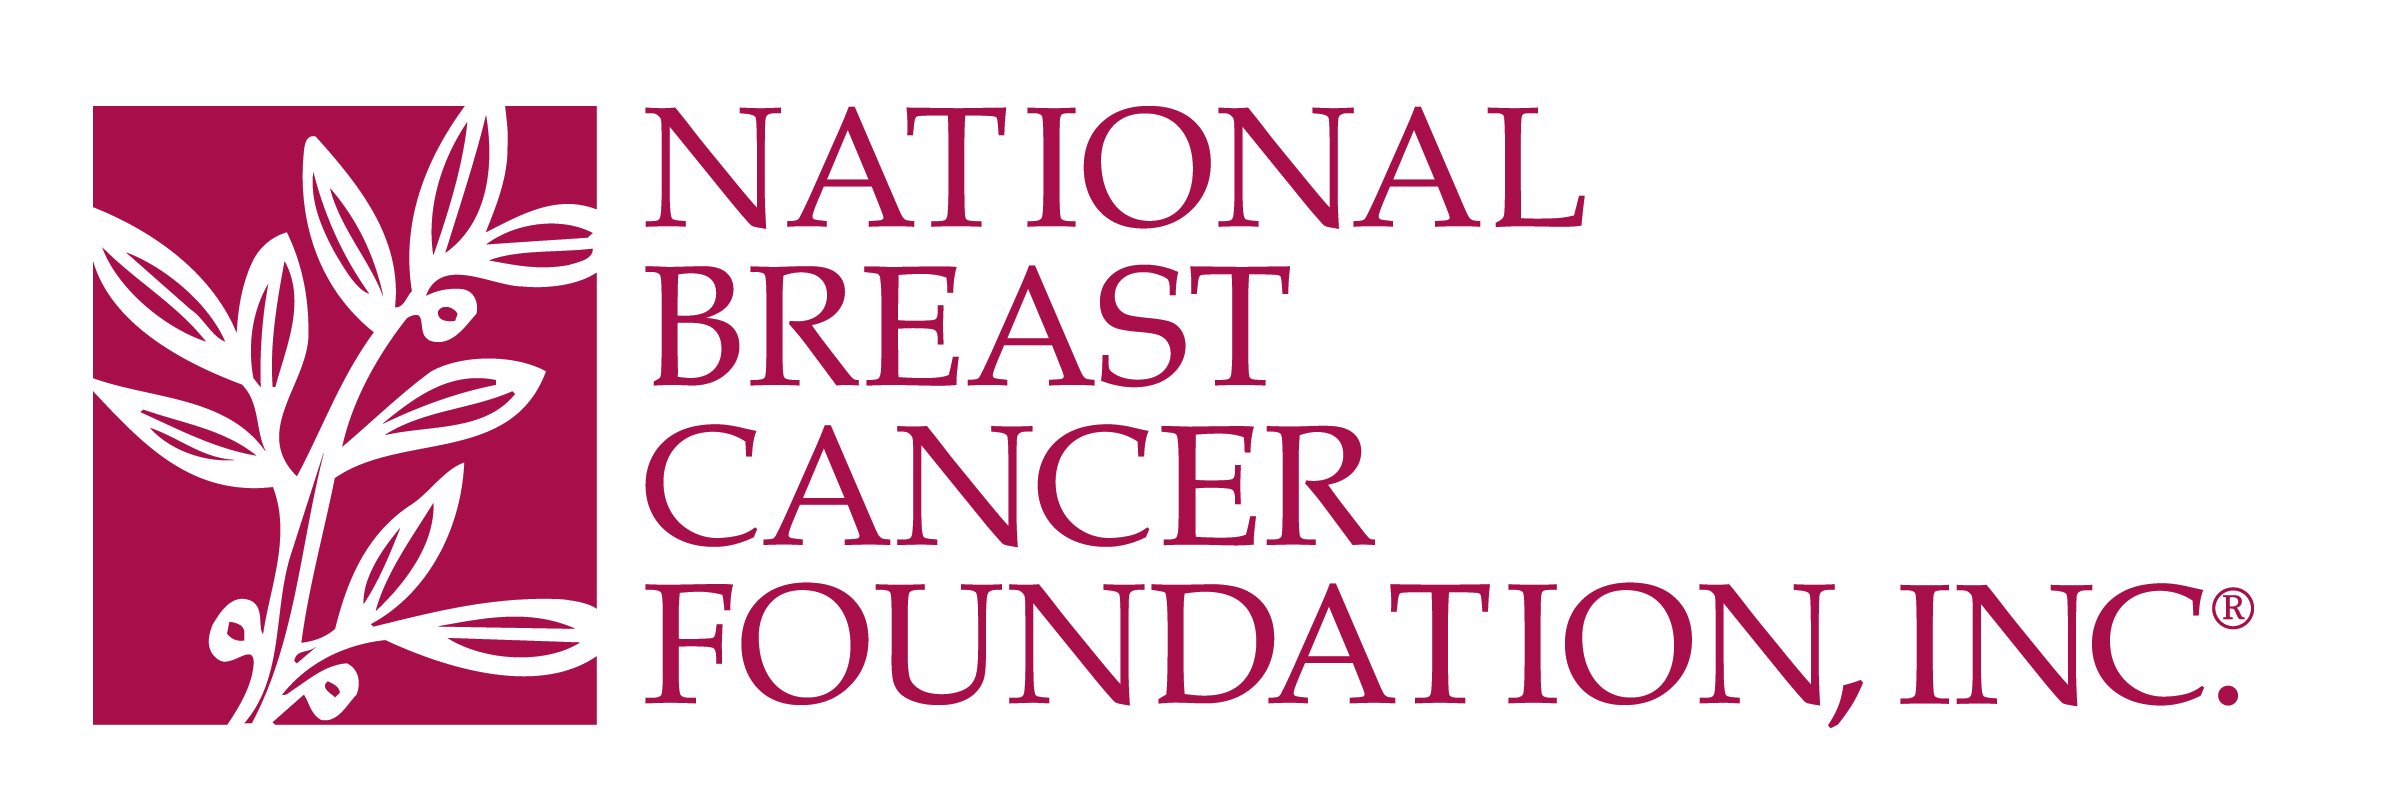 National Breast Cance Foundation